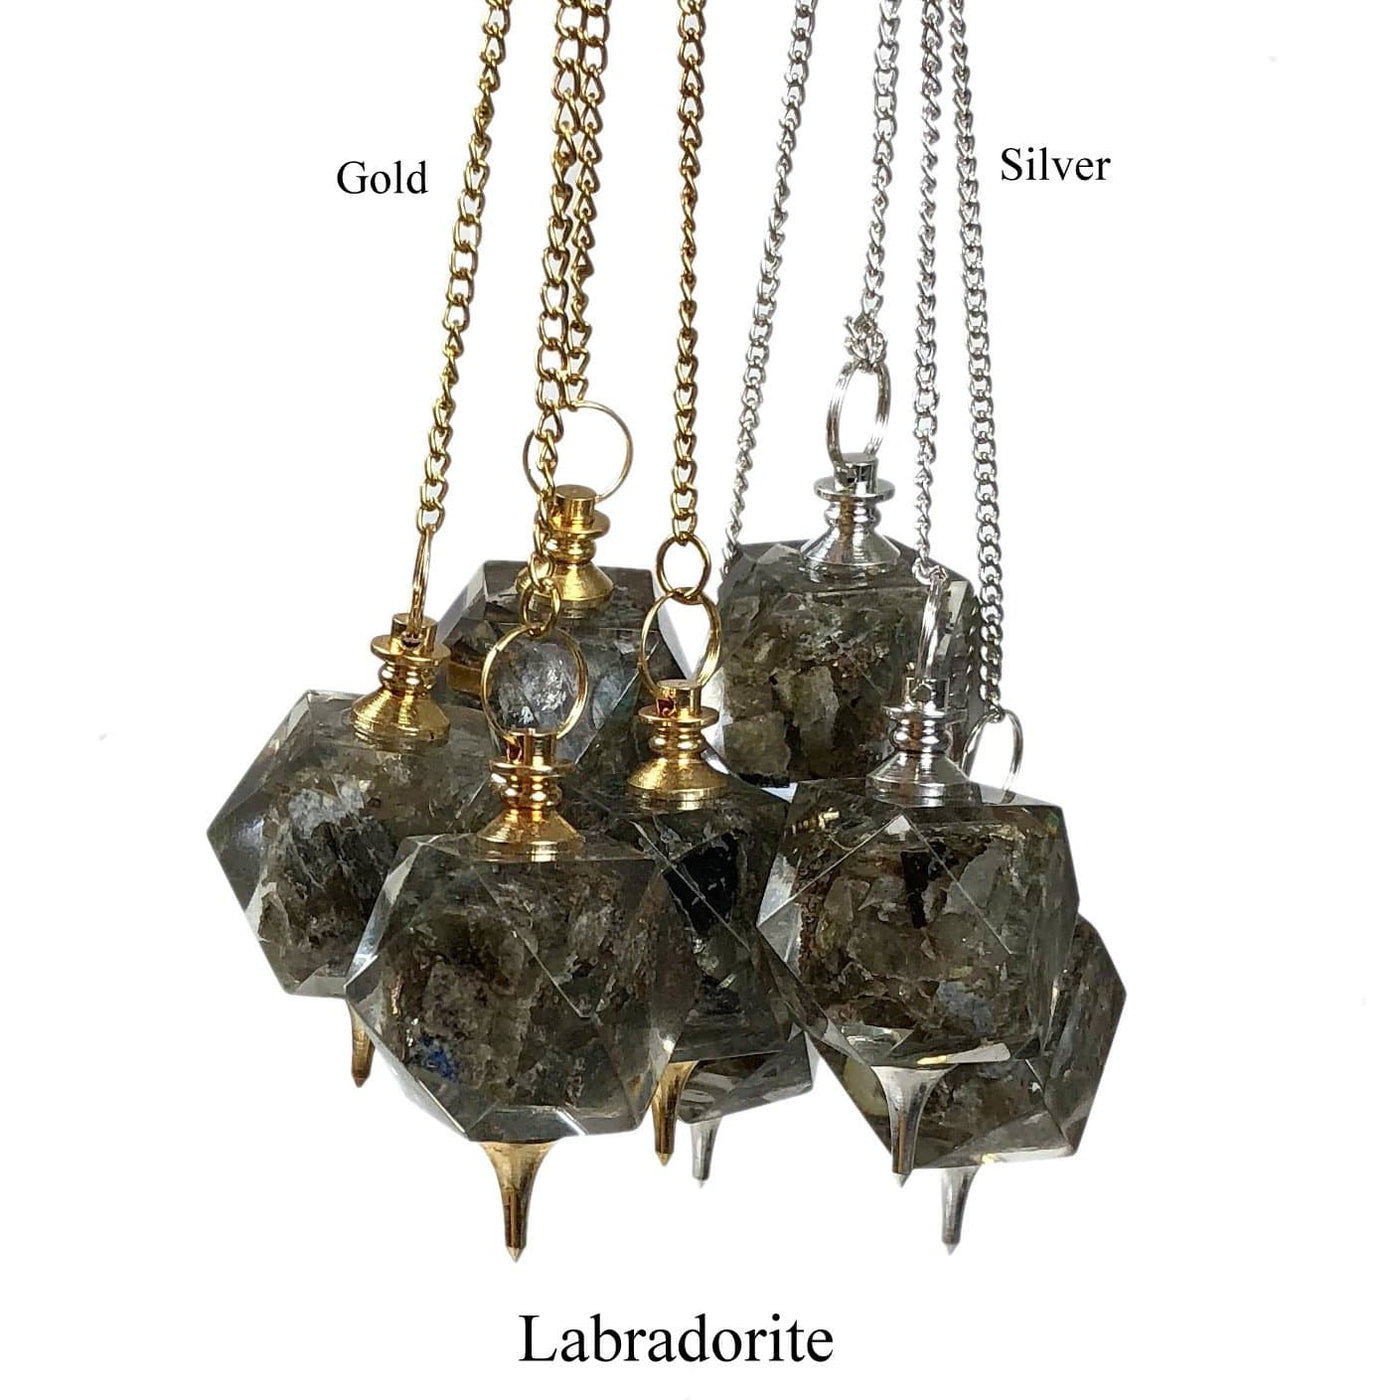 Three Labradorite Pendulum with Gold chain on the left and three Labradorite Pendulum with silver chain on the right